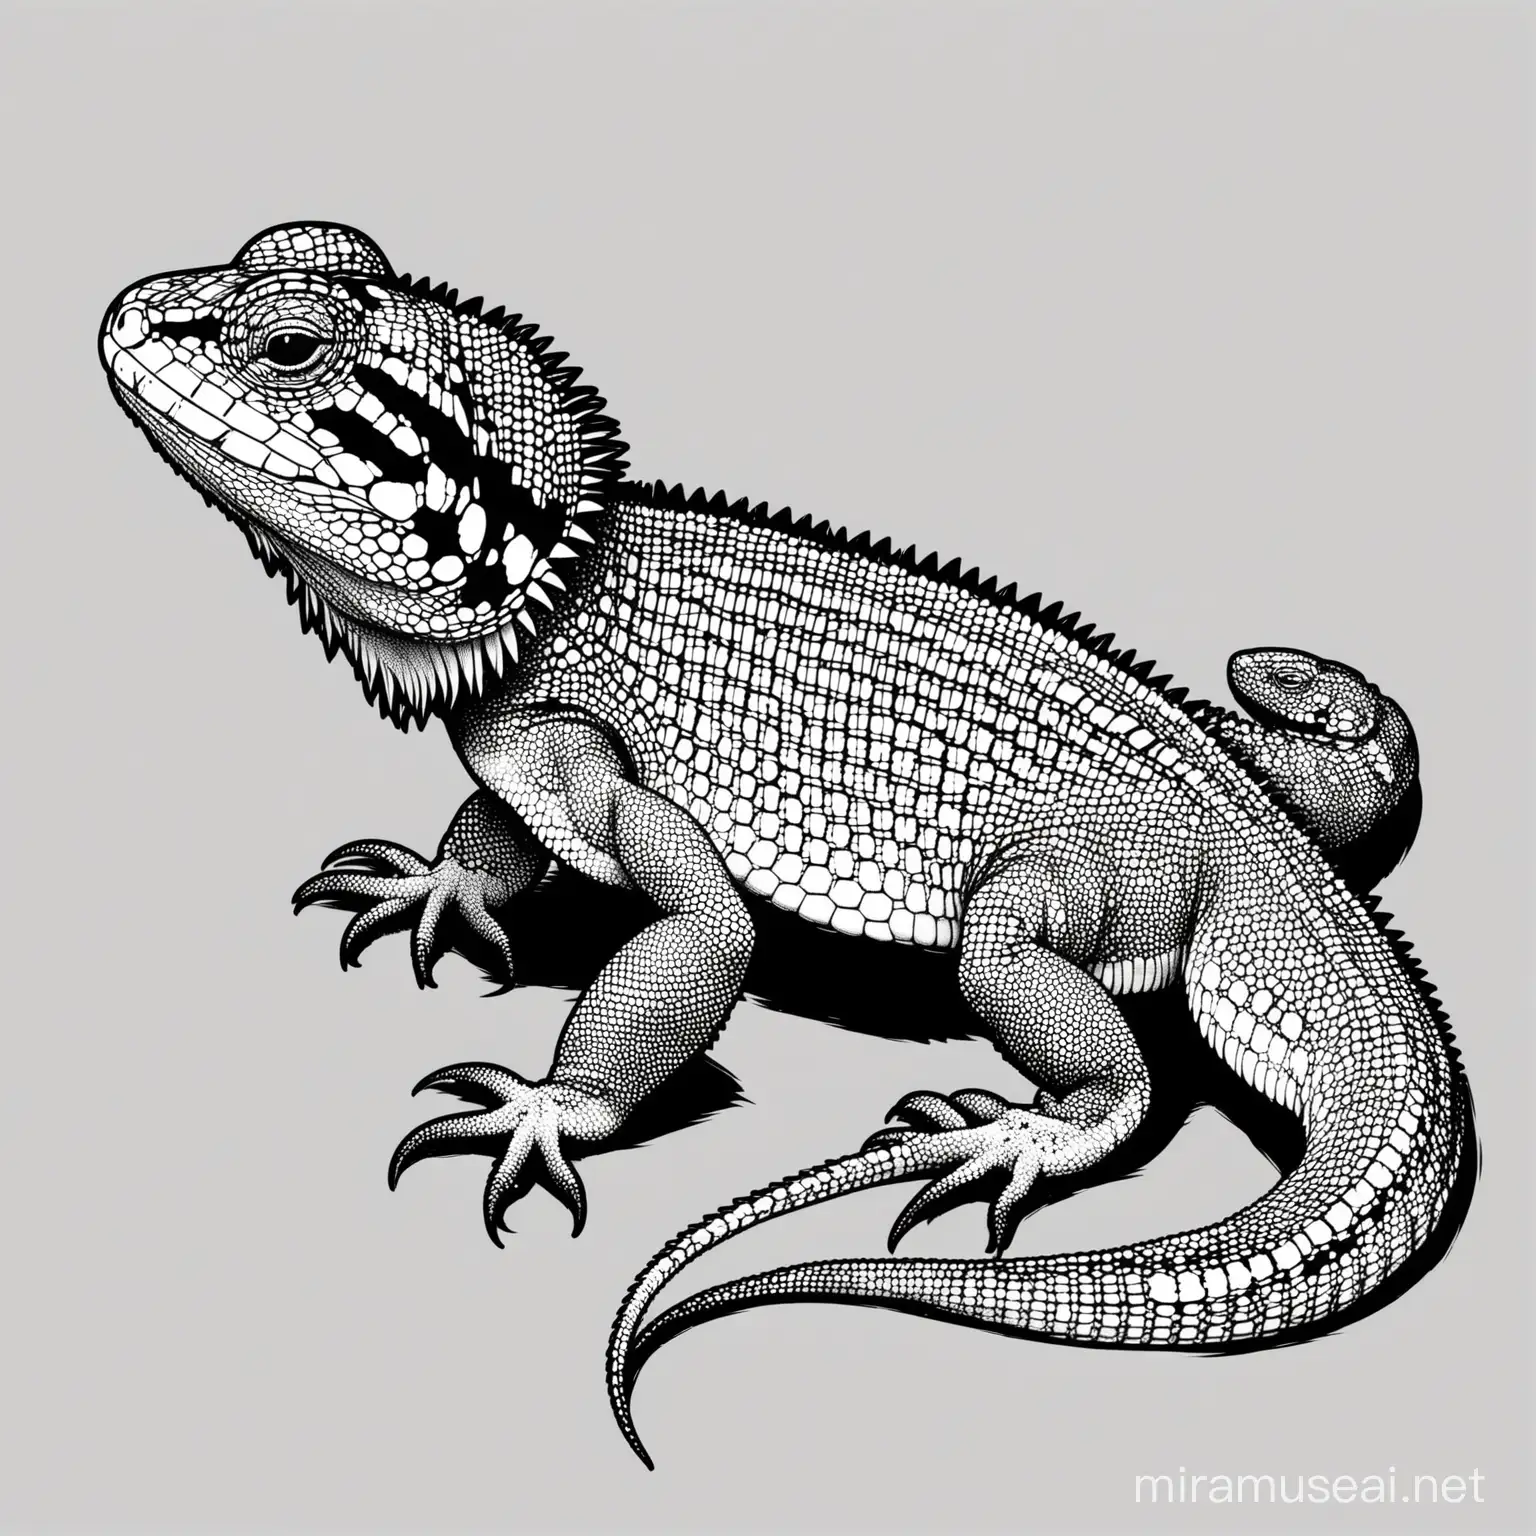 Detailed Black and White Outlines of Eastern Collared Lizard on White Background